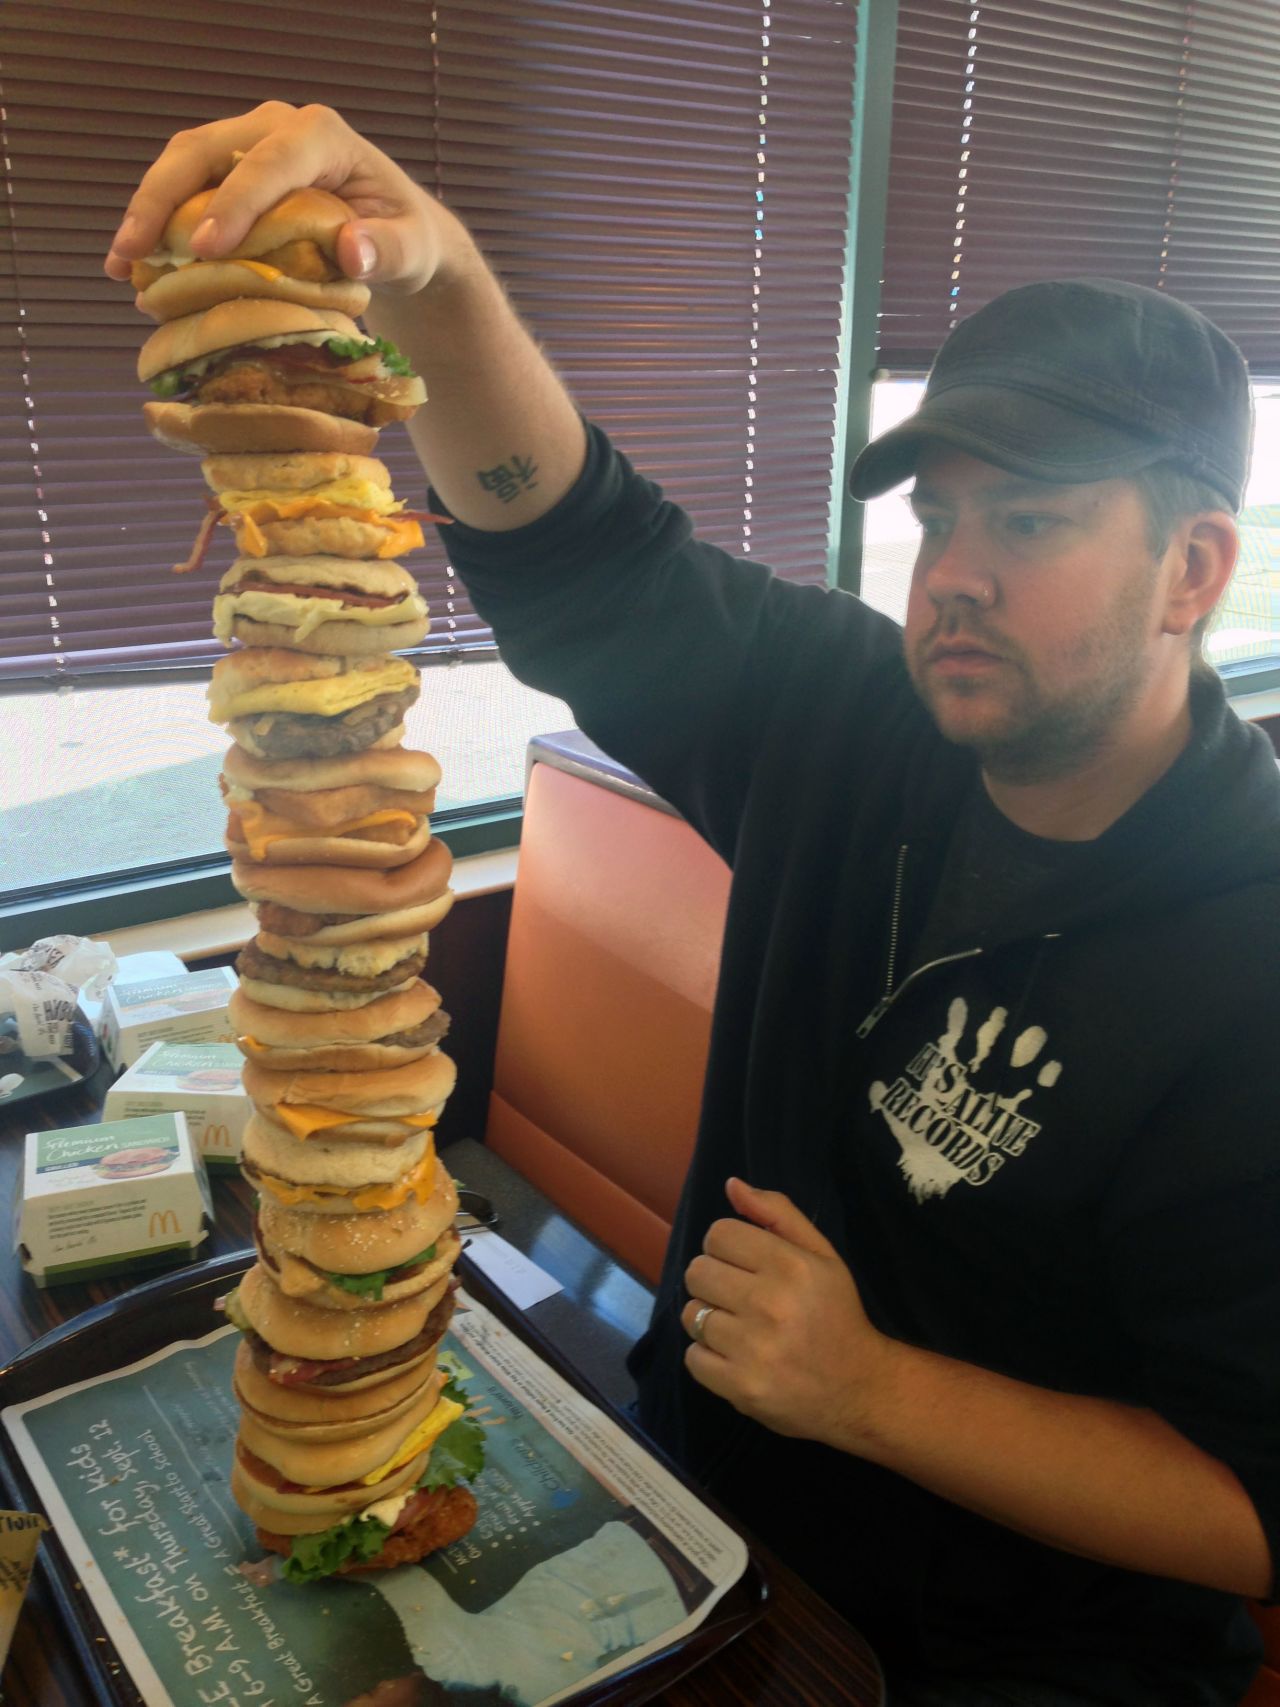 It took 'lots and lots of bamboo skewers' to keep Chipman's gigantic sandwich together, but he persevered.